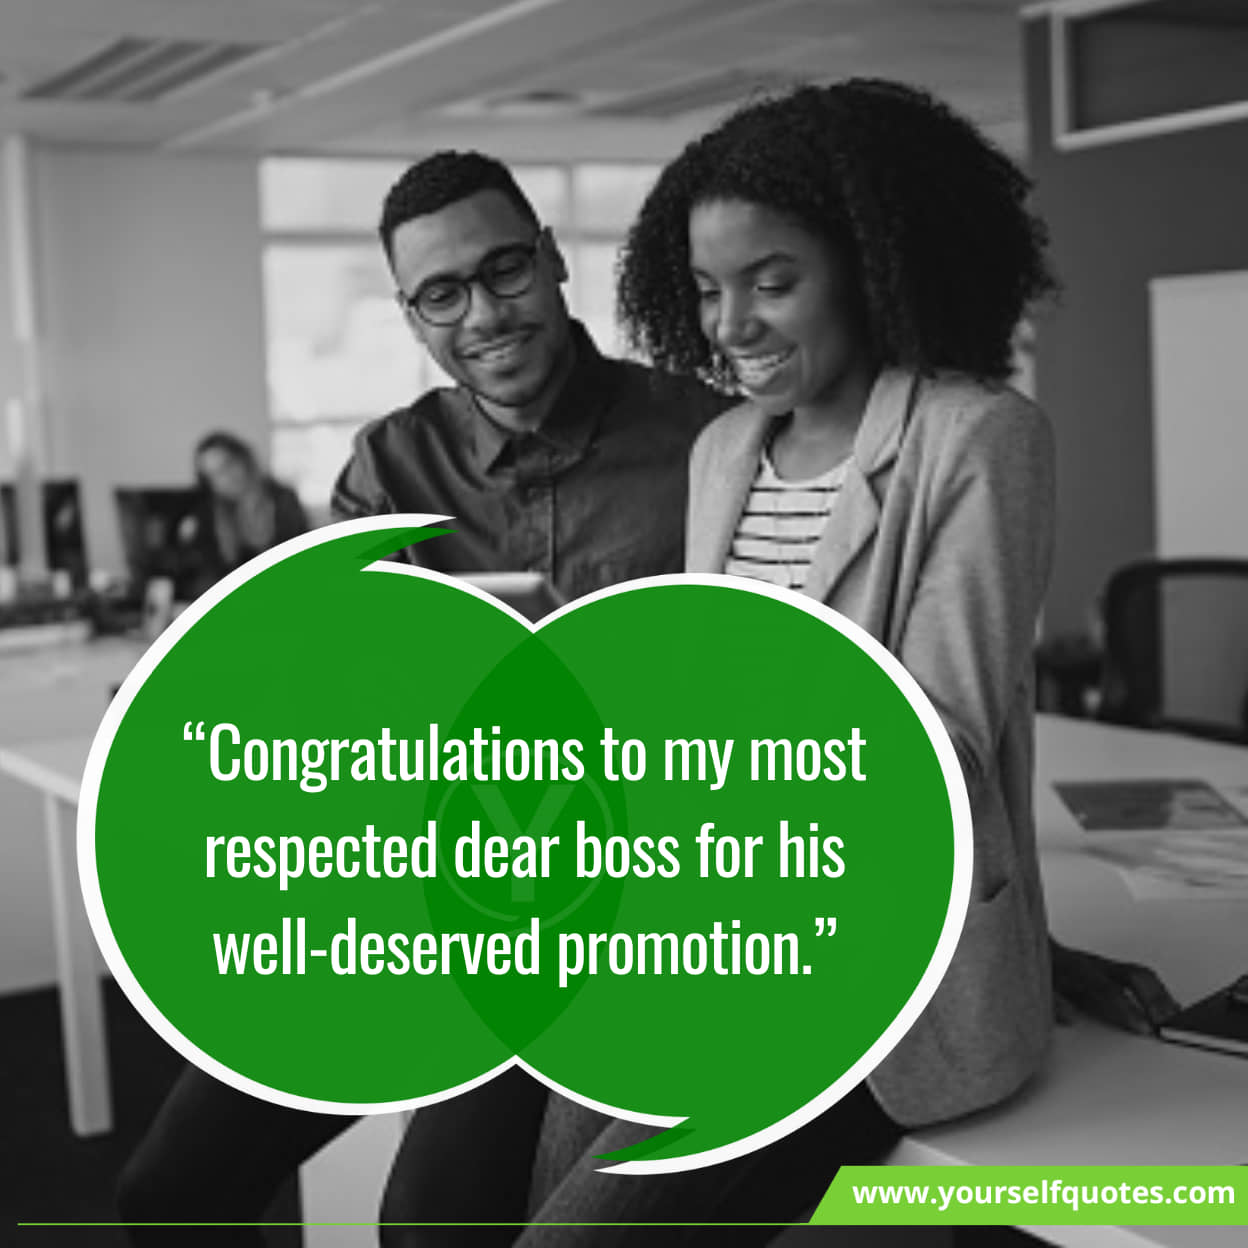 Congratulations Messages To Boss Promotion To Appreciate